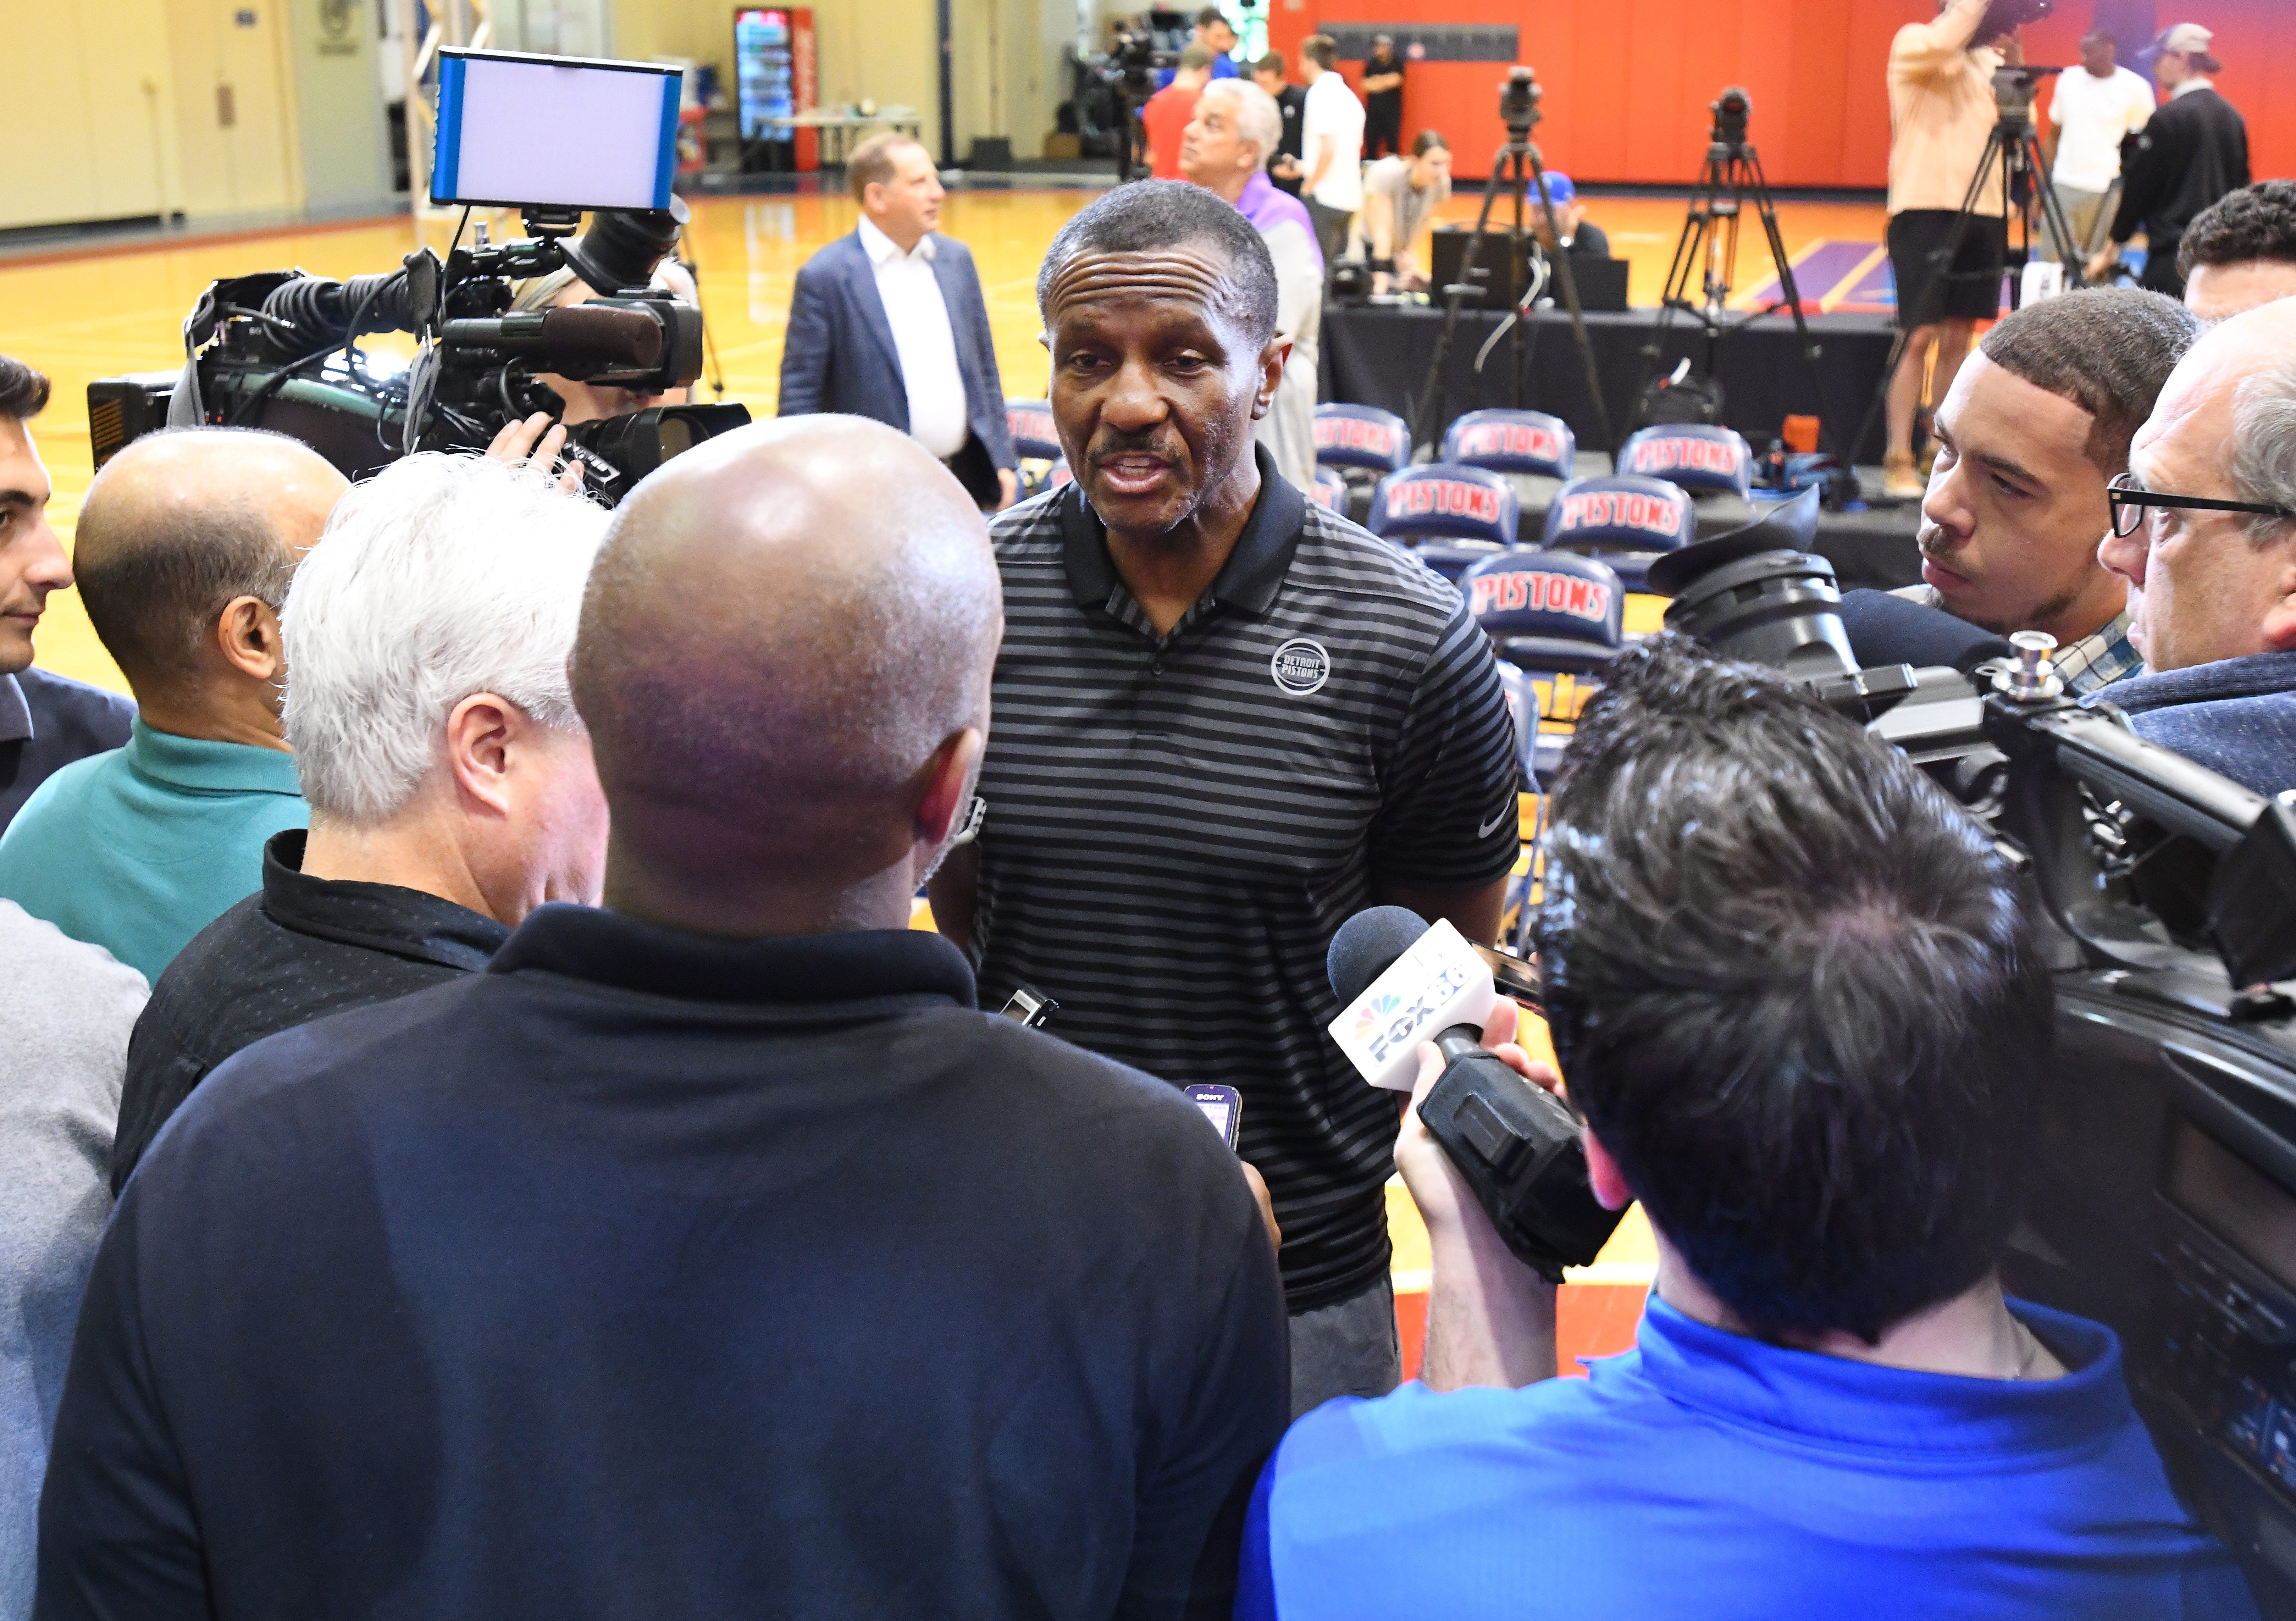 Pistons head coach Dwane Casey answers questions of the media after the press conference.